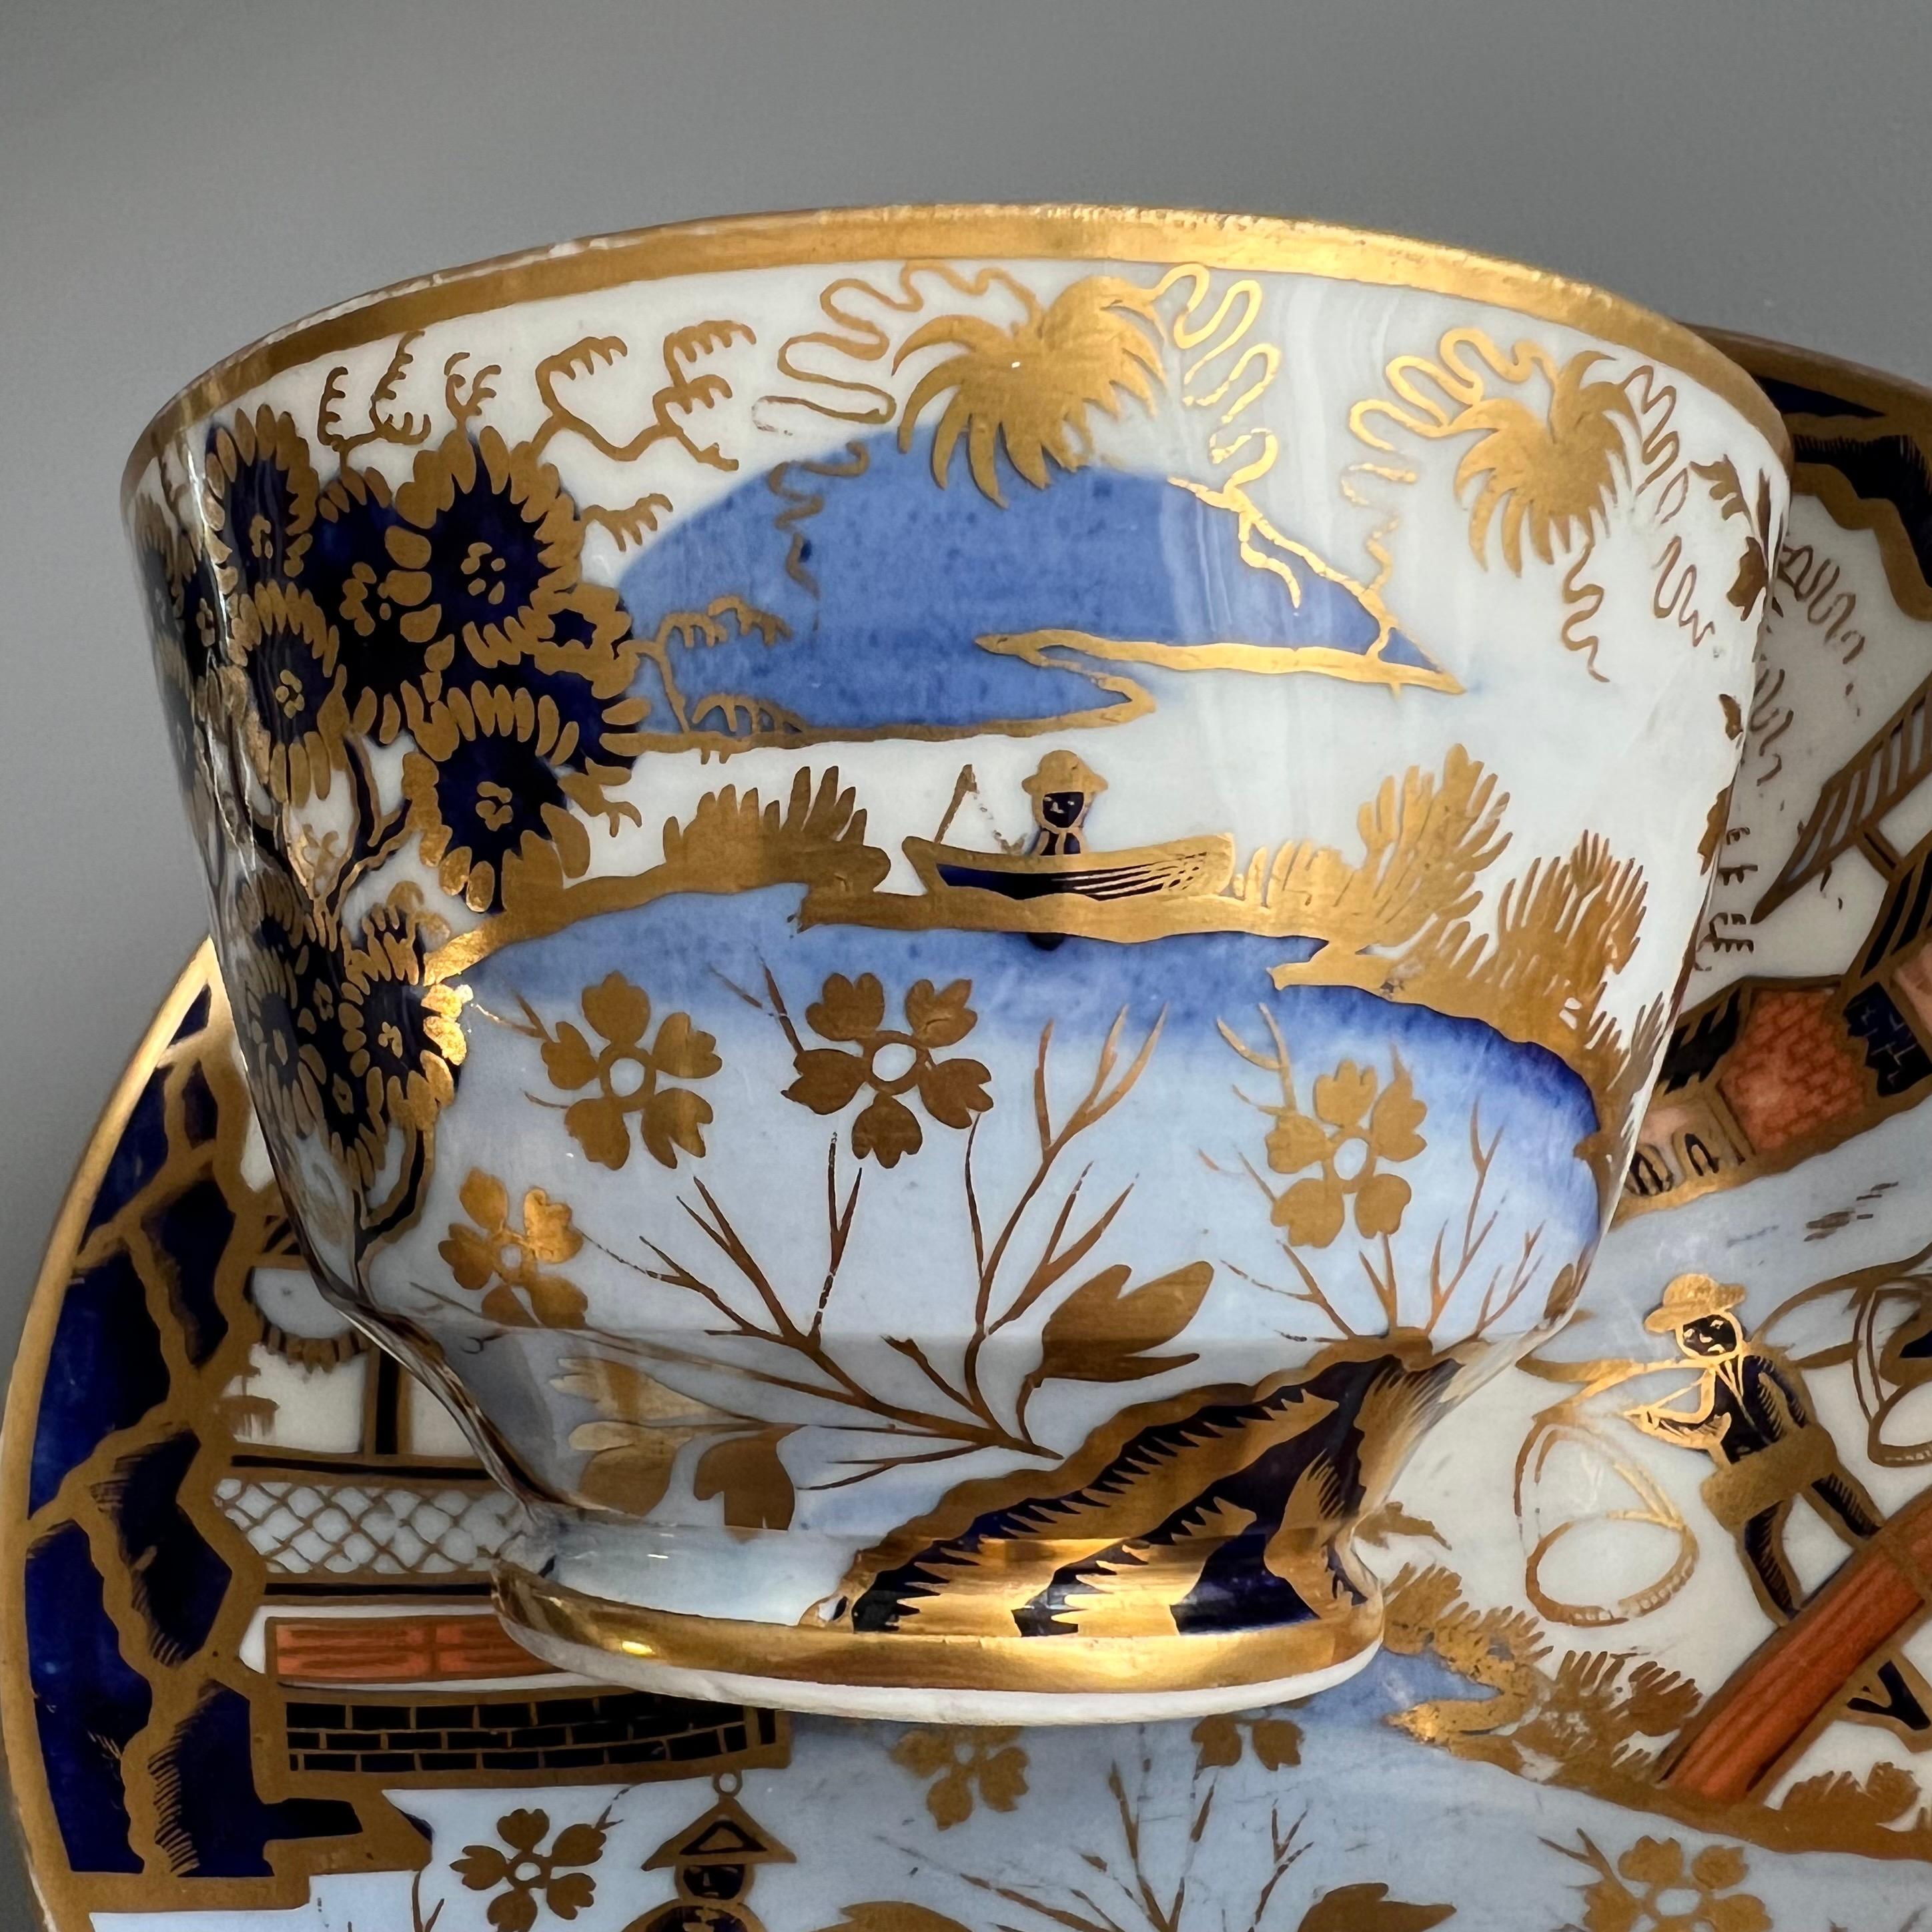 Early 19th Century New Hall Porcelain Teacup, Chinoiserie Water Carrier Pattern 1163, Ca 1815